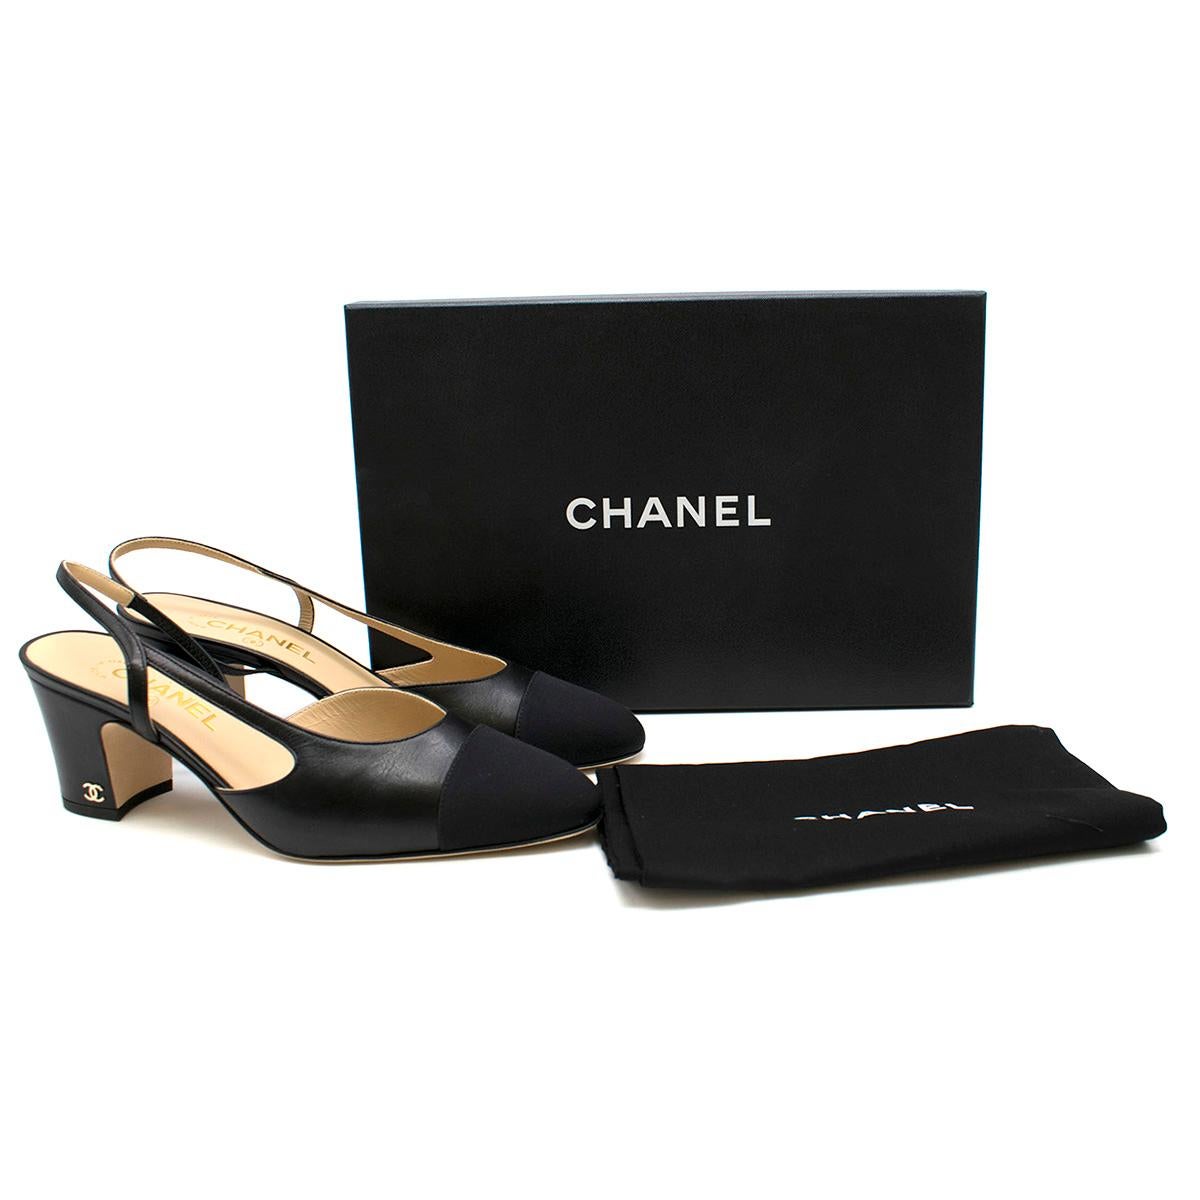 Chanel Black Leather Slingback Block Heels 

- Black Mule Heels
- Leather body, fabric toe 
- Rounded, slim toeline
- Slingback strap, stretch 
- Block heel 
- Leather sole 
- Gold toned signature logo at heel. 

This item comes with an additional